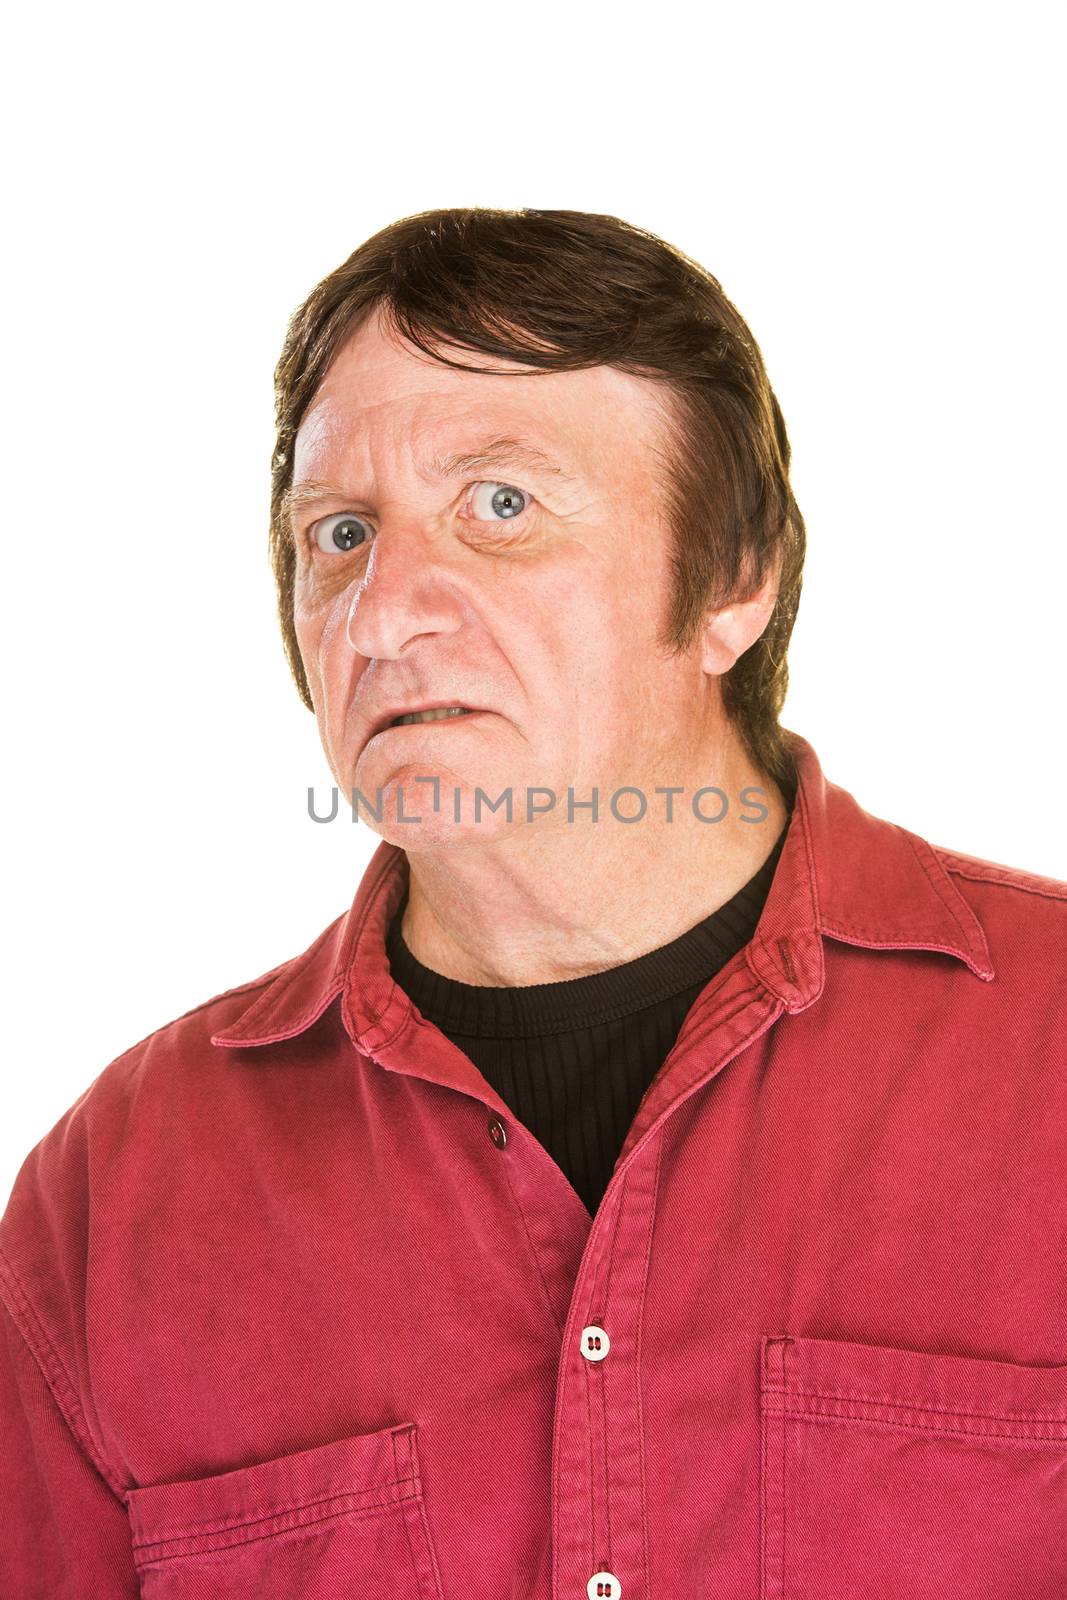 Middle aged white male with uncertain expression